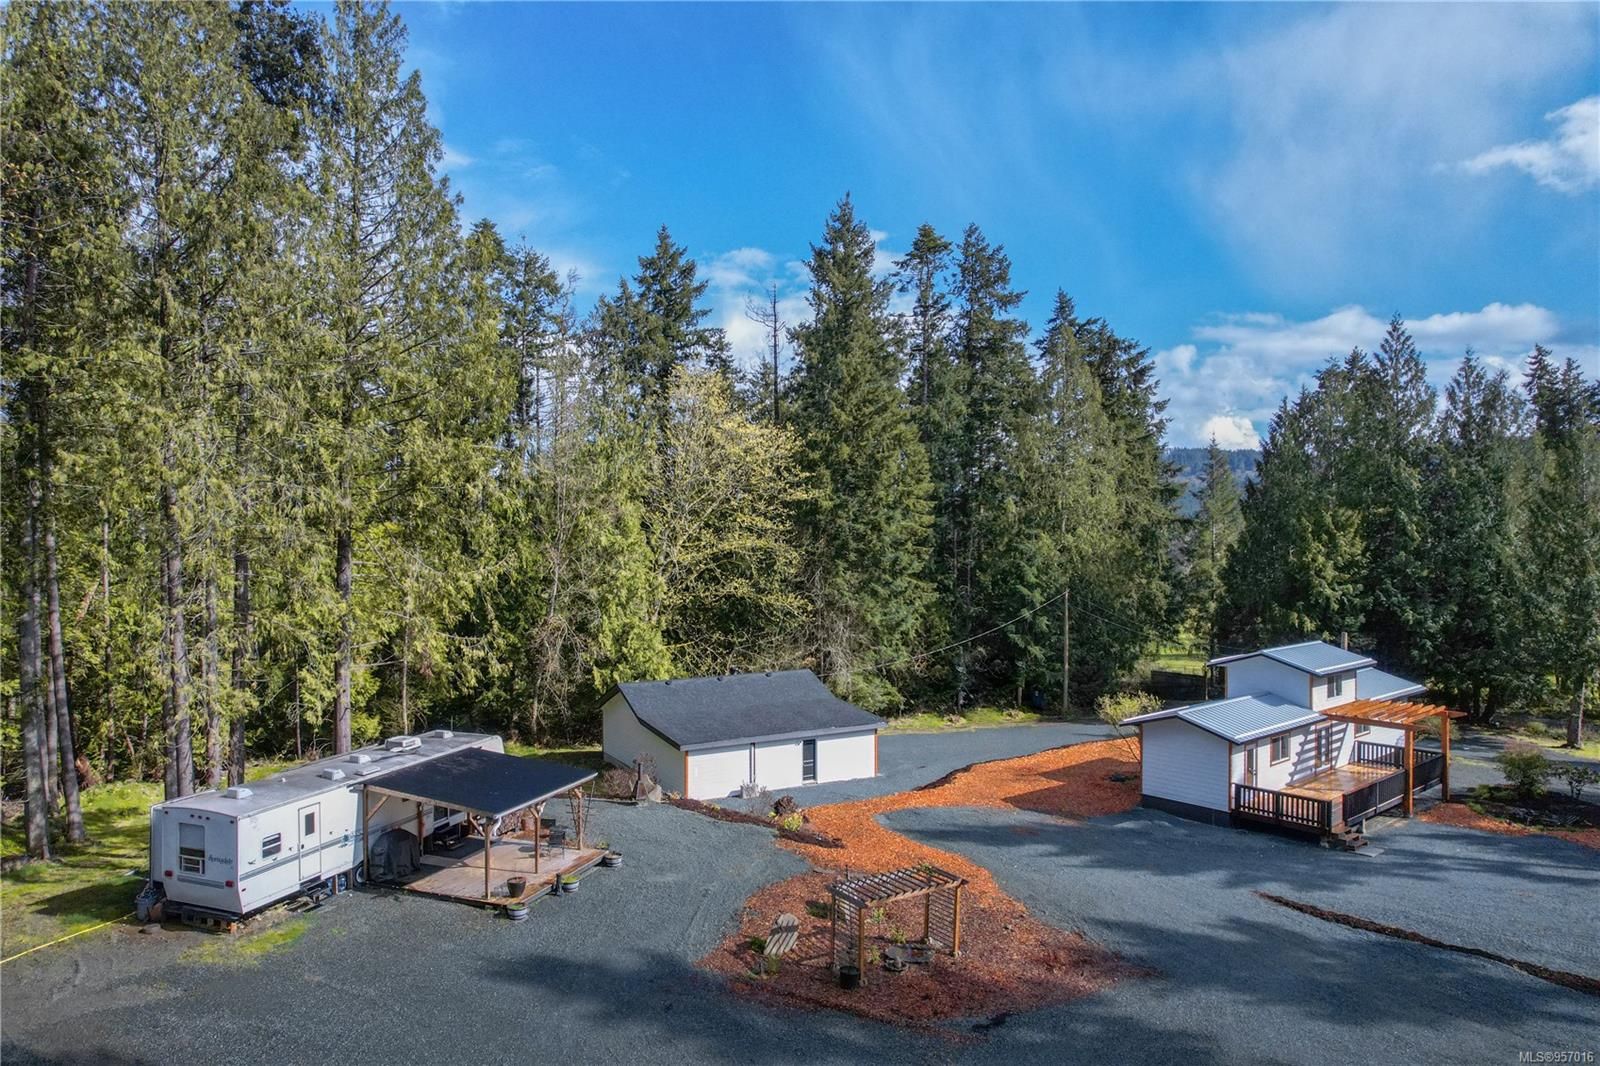 New property listed in Du Chemainus, Duncan